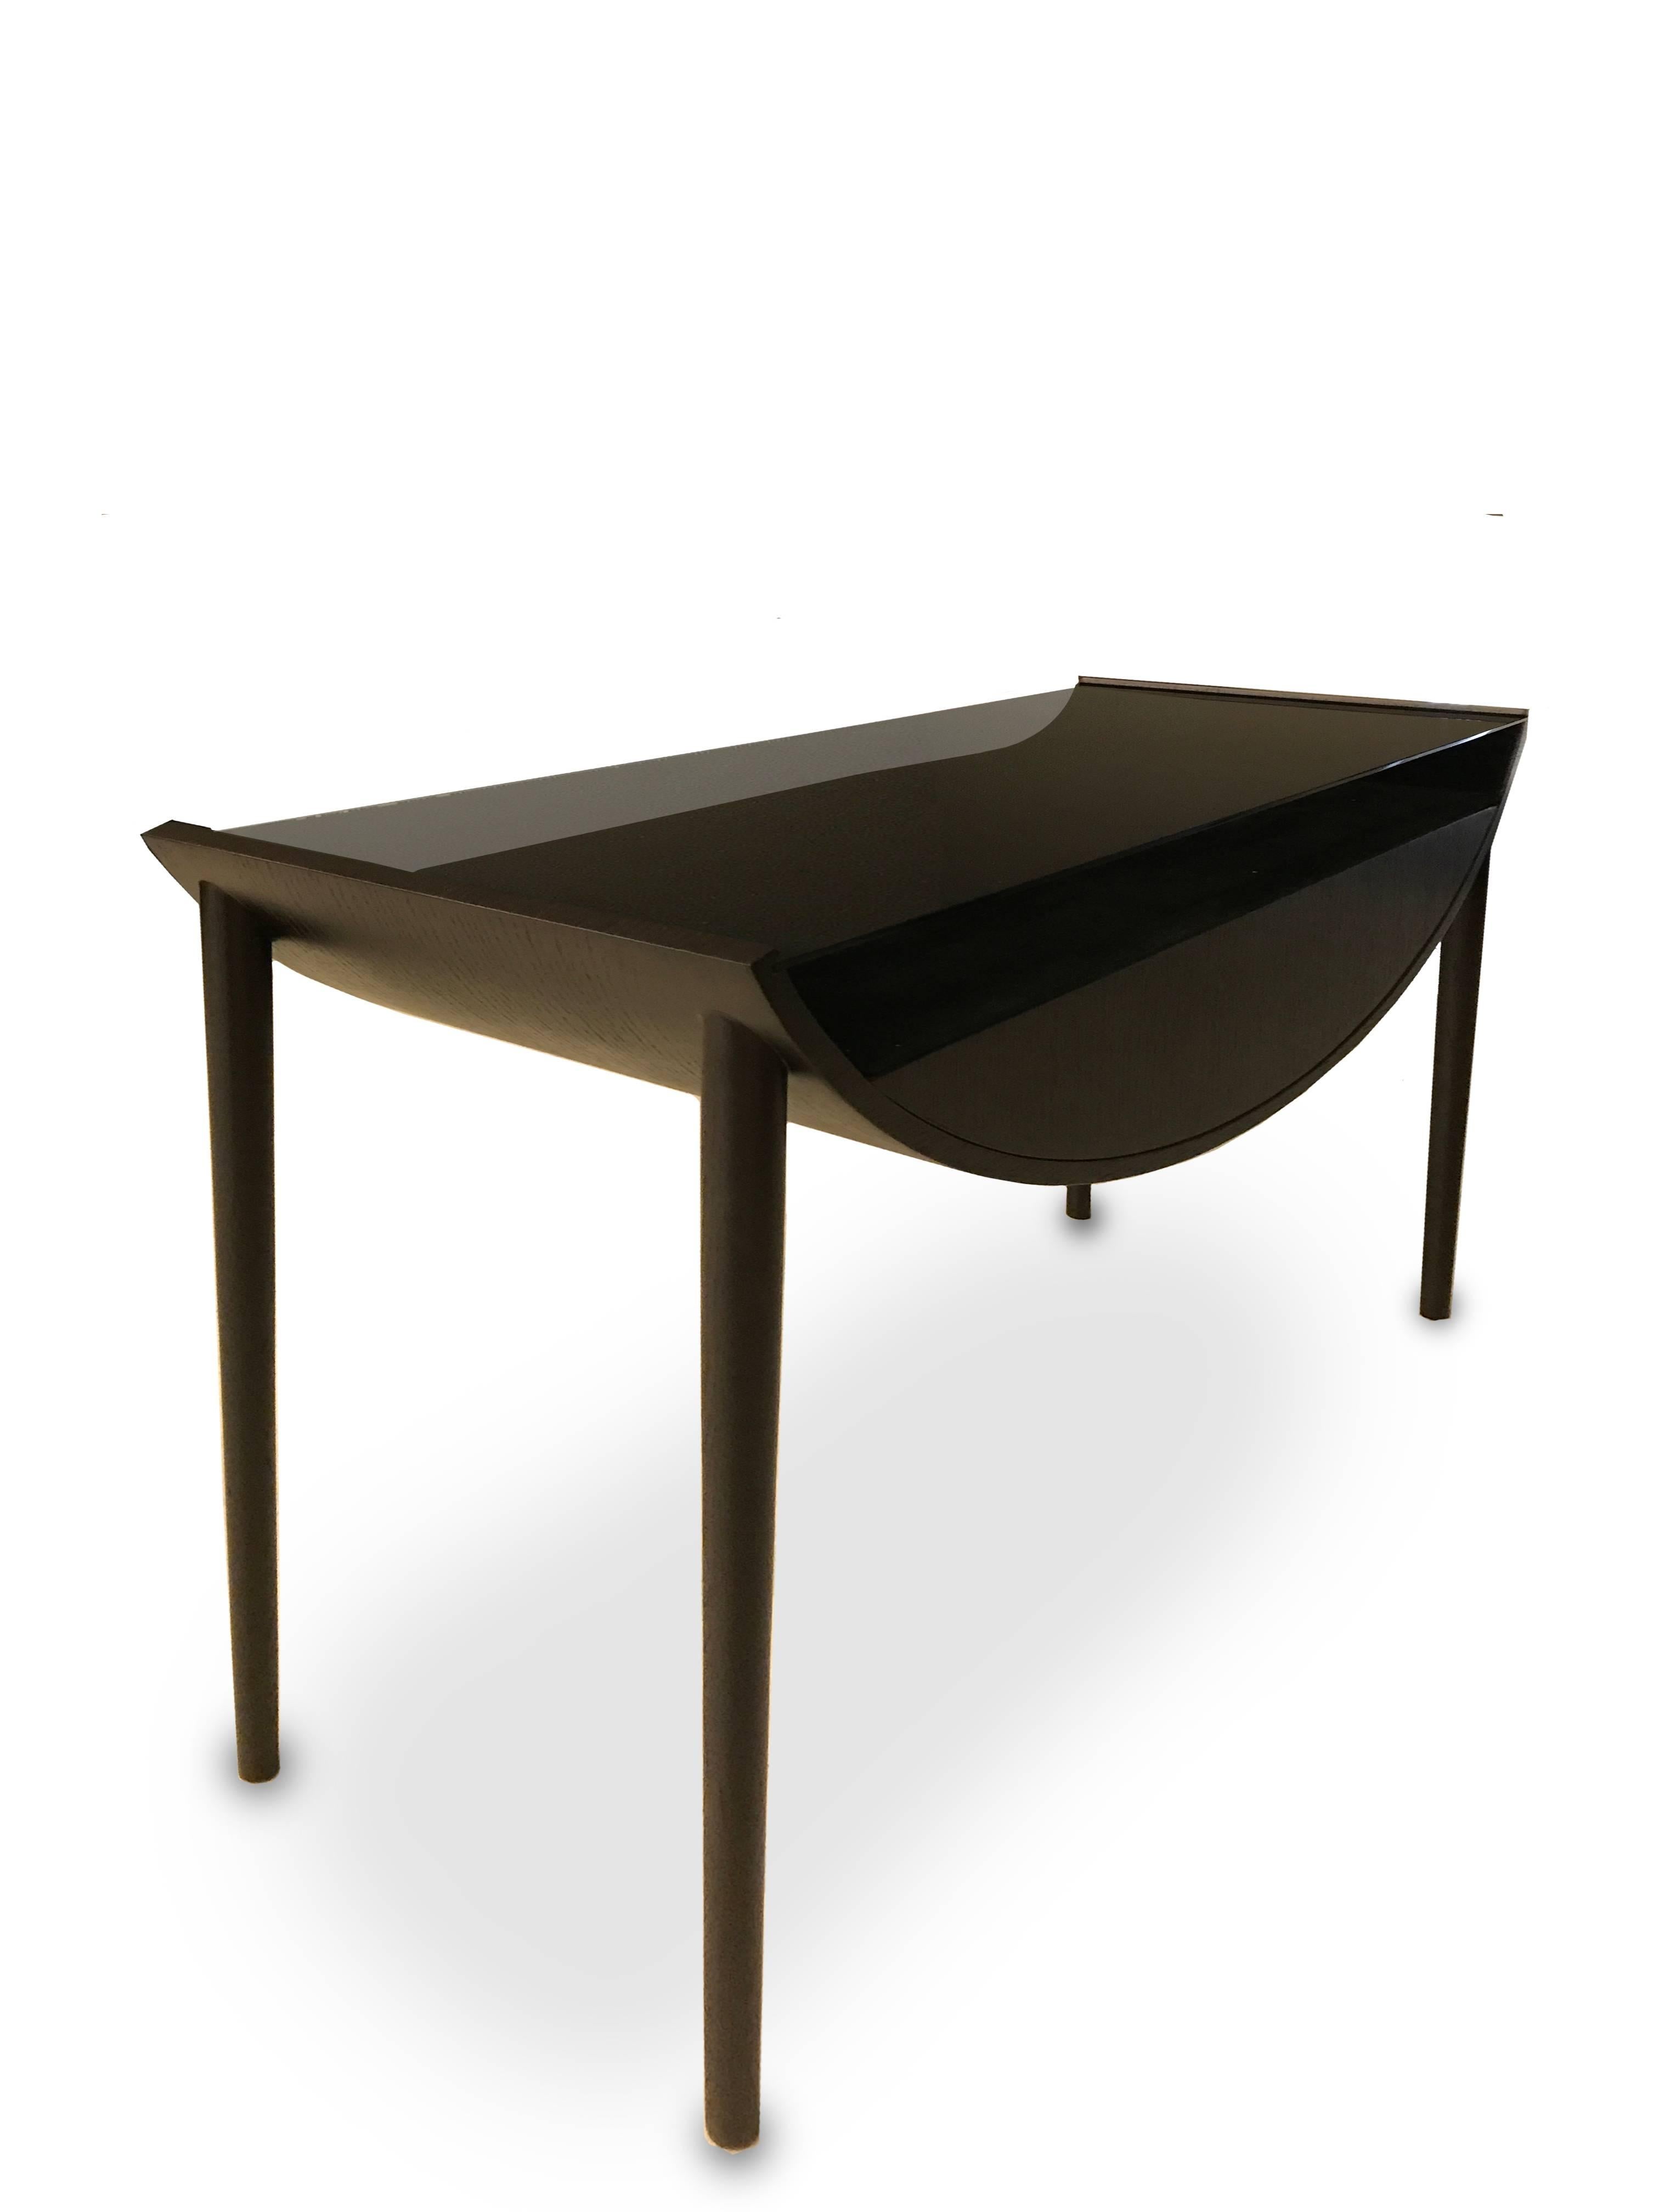 Chocolate oak console or dresser table with smoked glass on top and charcoal ecological faux suede. 
Oak venire in semi-matte finish. 

Made to order in variety of veneers (matte, gloss, etc) and various glass surfaces (smoked, crystal glass etc)